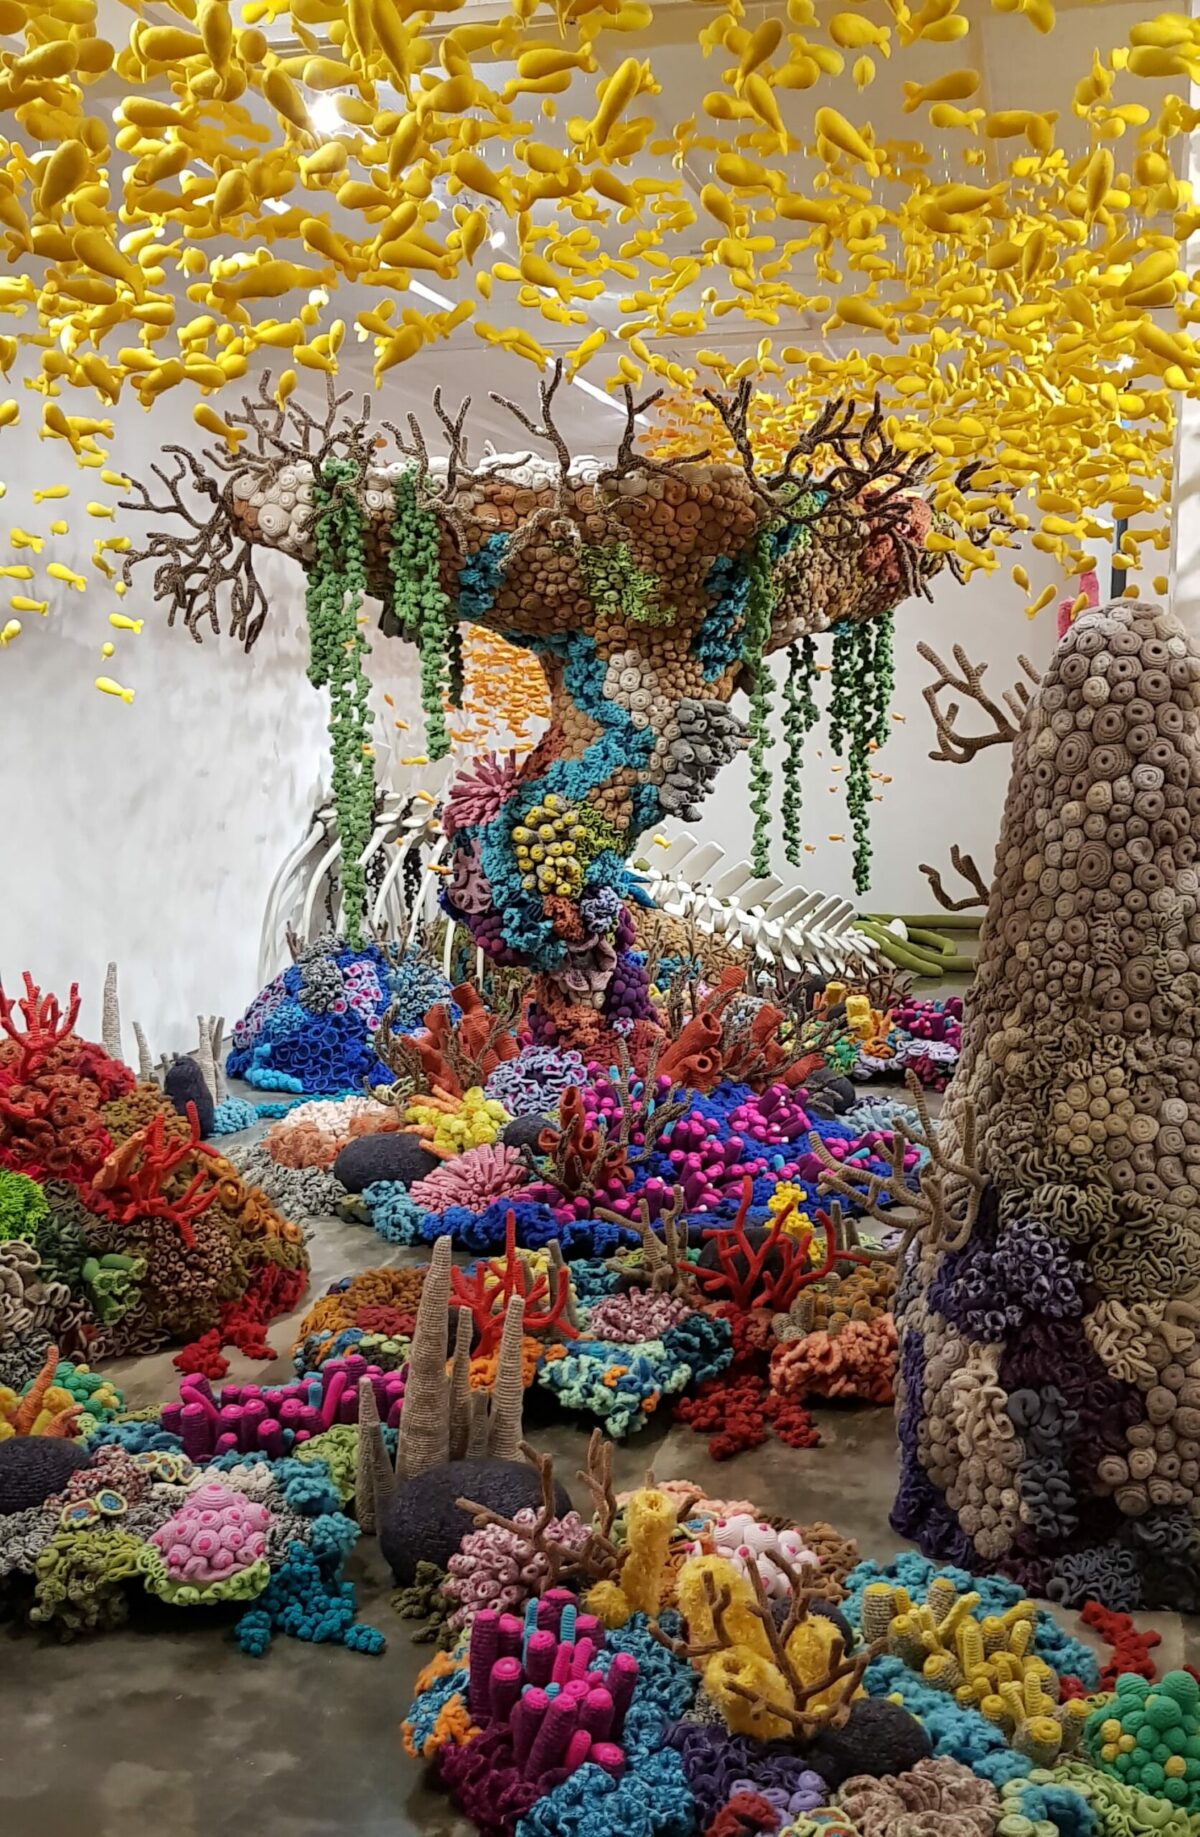 Fragile Ecologies Otherworldly Embroidered Coral Like Ecosystems By Mulyana 2